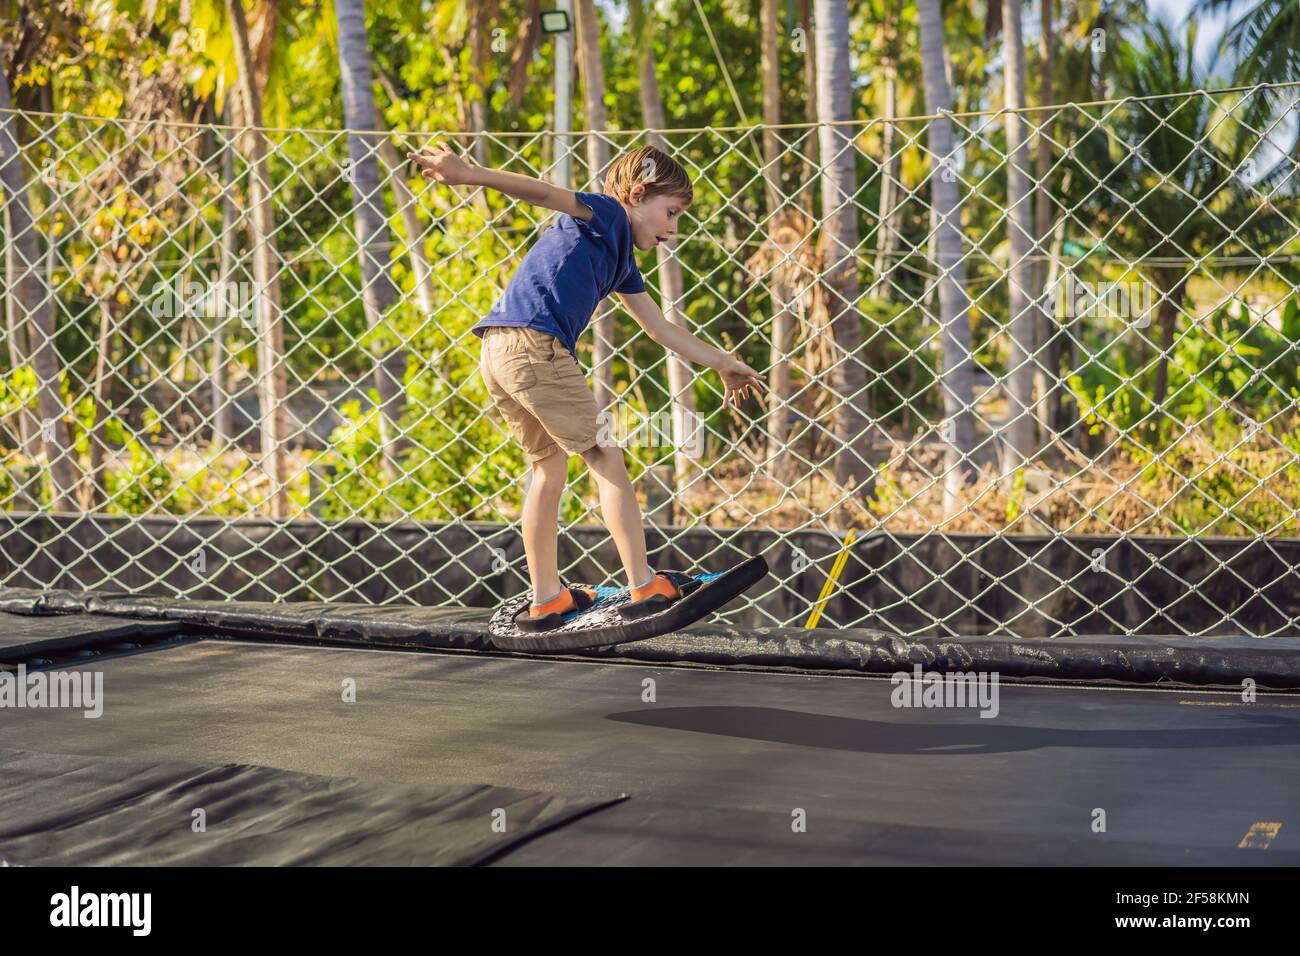 Happy boy on a soft board for a trampoline jumping on an outdoor trampoline, against the backdrop of palm trees. The trampoline board is like a Stock Photo